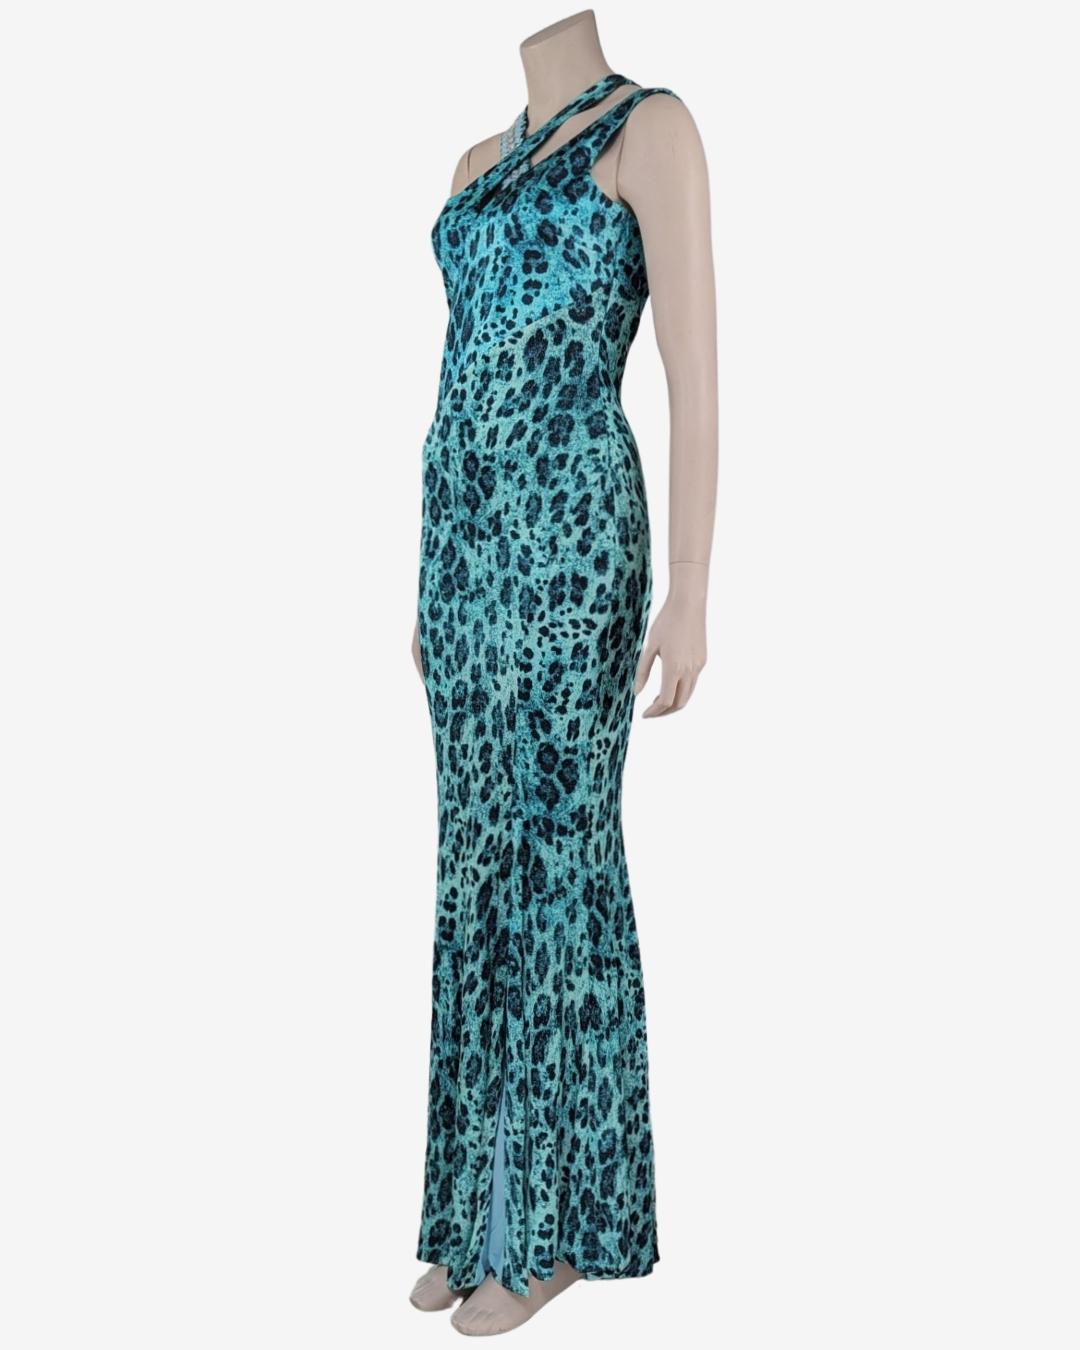 Animal print all-over maxi dress from the Fall 2012 Collection.

. Strass on the strap of the dress
· Cross strap Neckline
· Animal Print
. Mermaid shape
 

Fits M / Tag 42IT 38FR

Flat measurements : 

Breast : 44 cm
Waist : 35 cm
Hips : 45